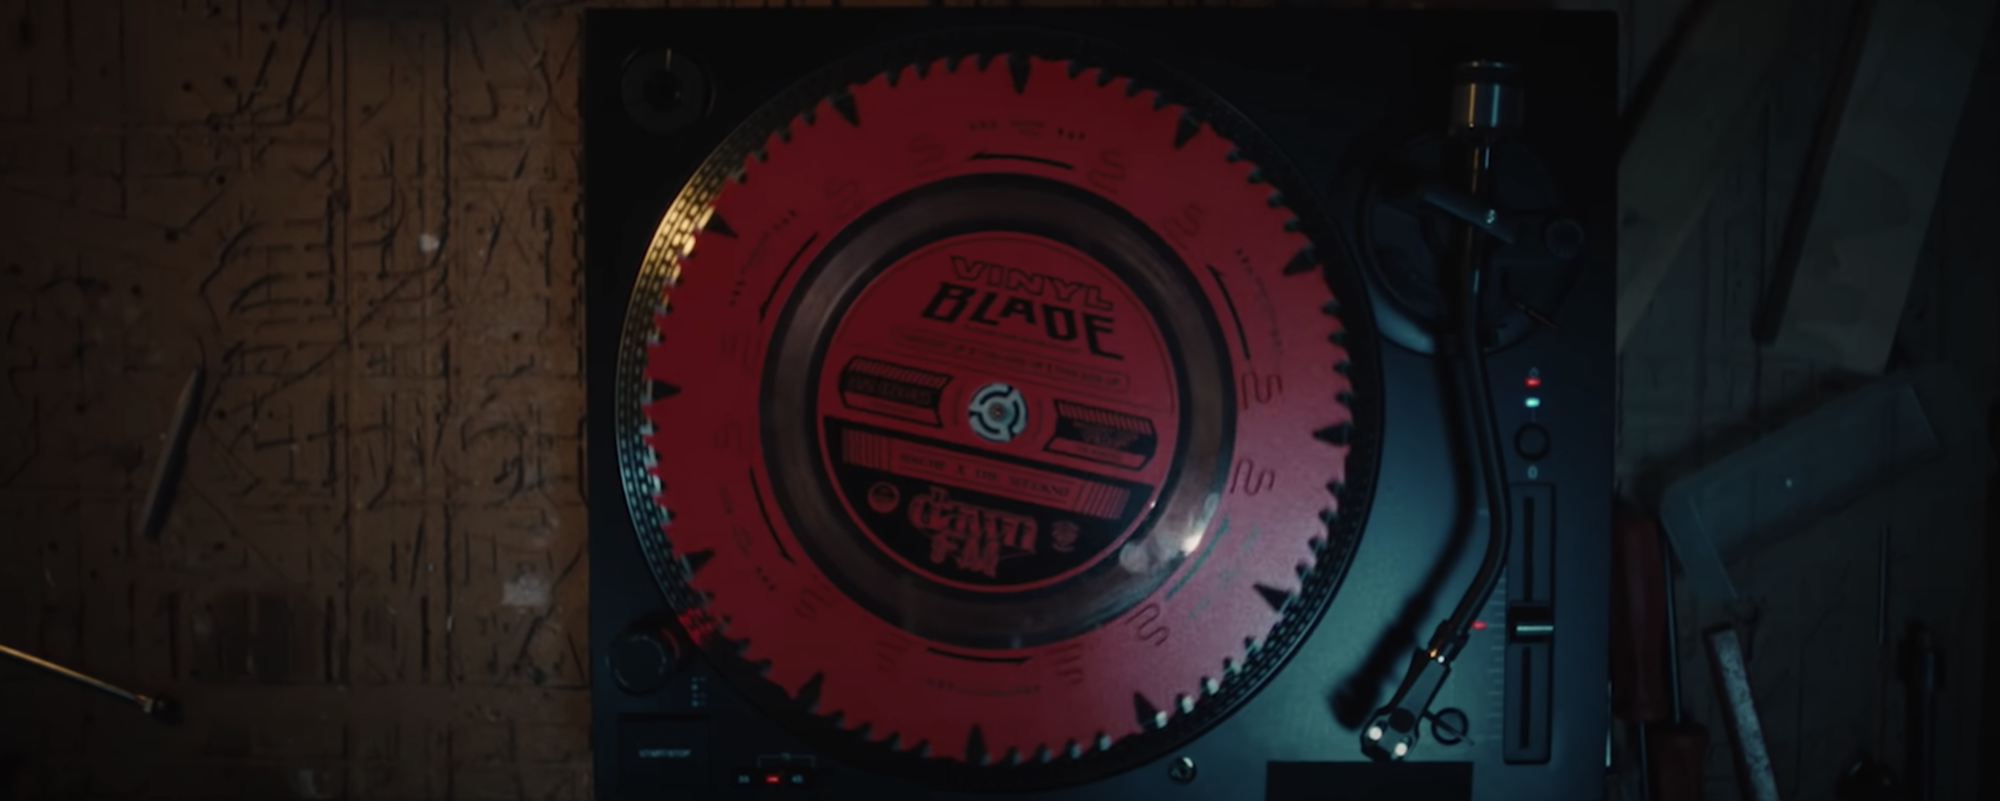 The Weeknd’s New Record Has Duel Functionality as a Vinyl Blade: “Do Not Operate While Heartbroken”